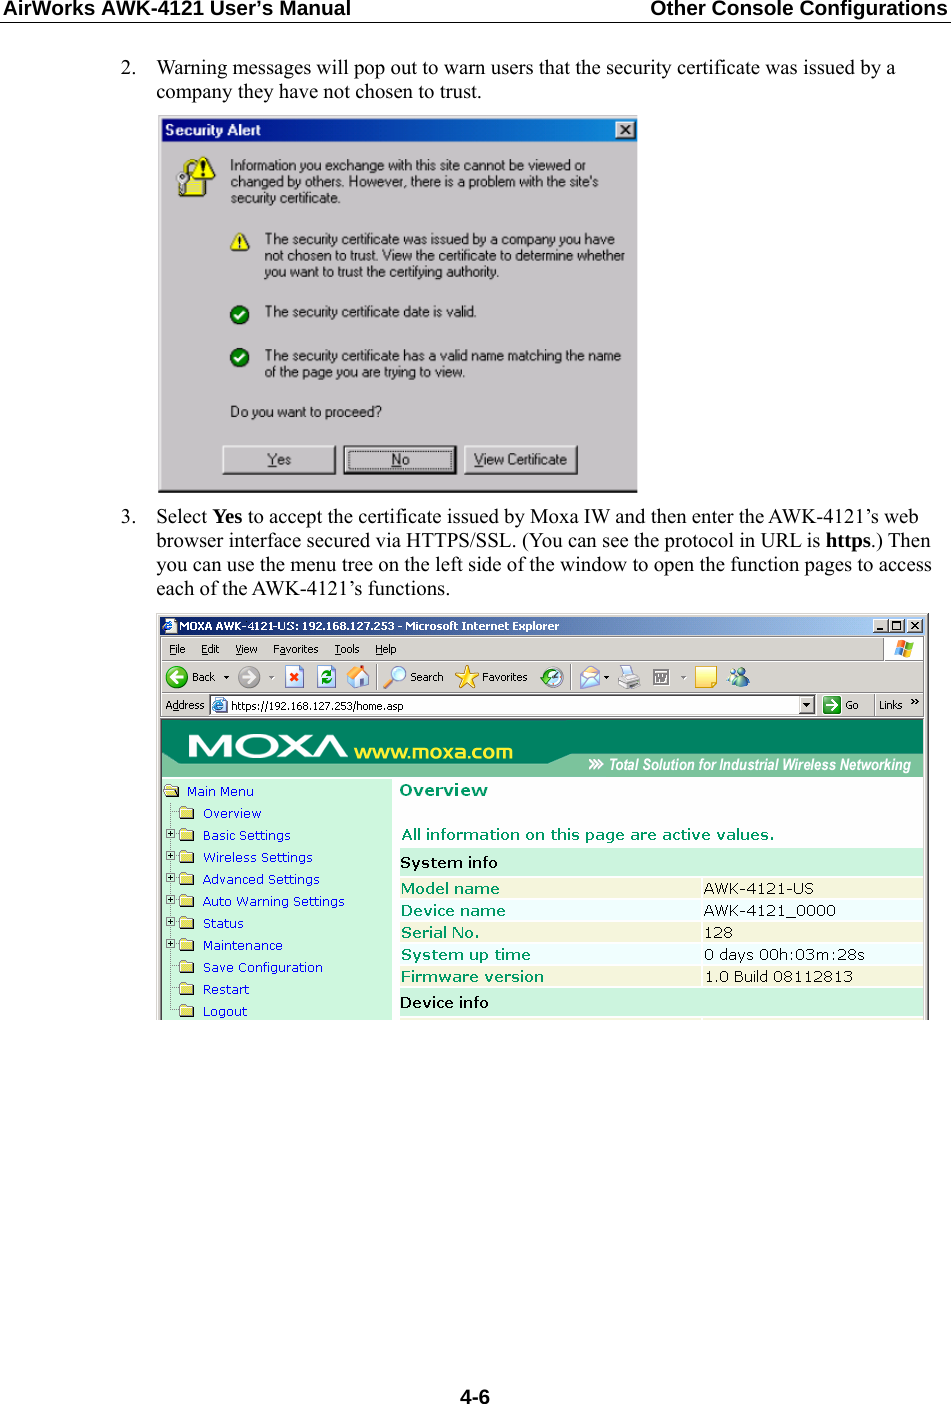 AirWorks AWK-4121 User’s Manual  Other Console Configurations  2. Warning messages will pop out to warn users that the security certificate was issued by a company they have not chosen to trust.  3. Select Yes to accept the certificate issued by Moxa IW and then enter the AWK-4121’s web browser interface secured via HTTPS/SSL. (You can see the protocol in URL is https.) Then you can use the menu tree on the left side of the window to open the function pages to access each of the AWK-4121’s functions.             4-6